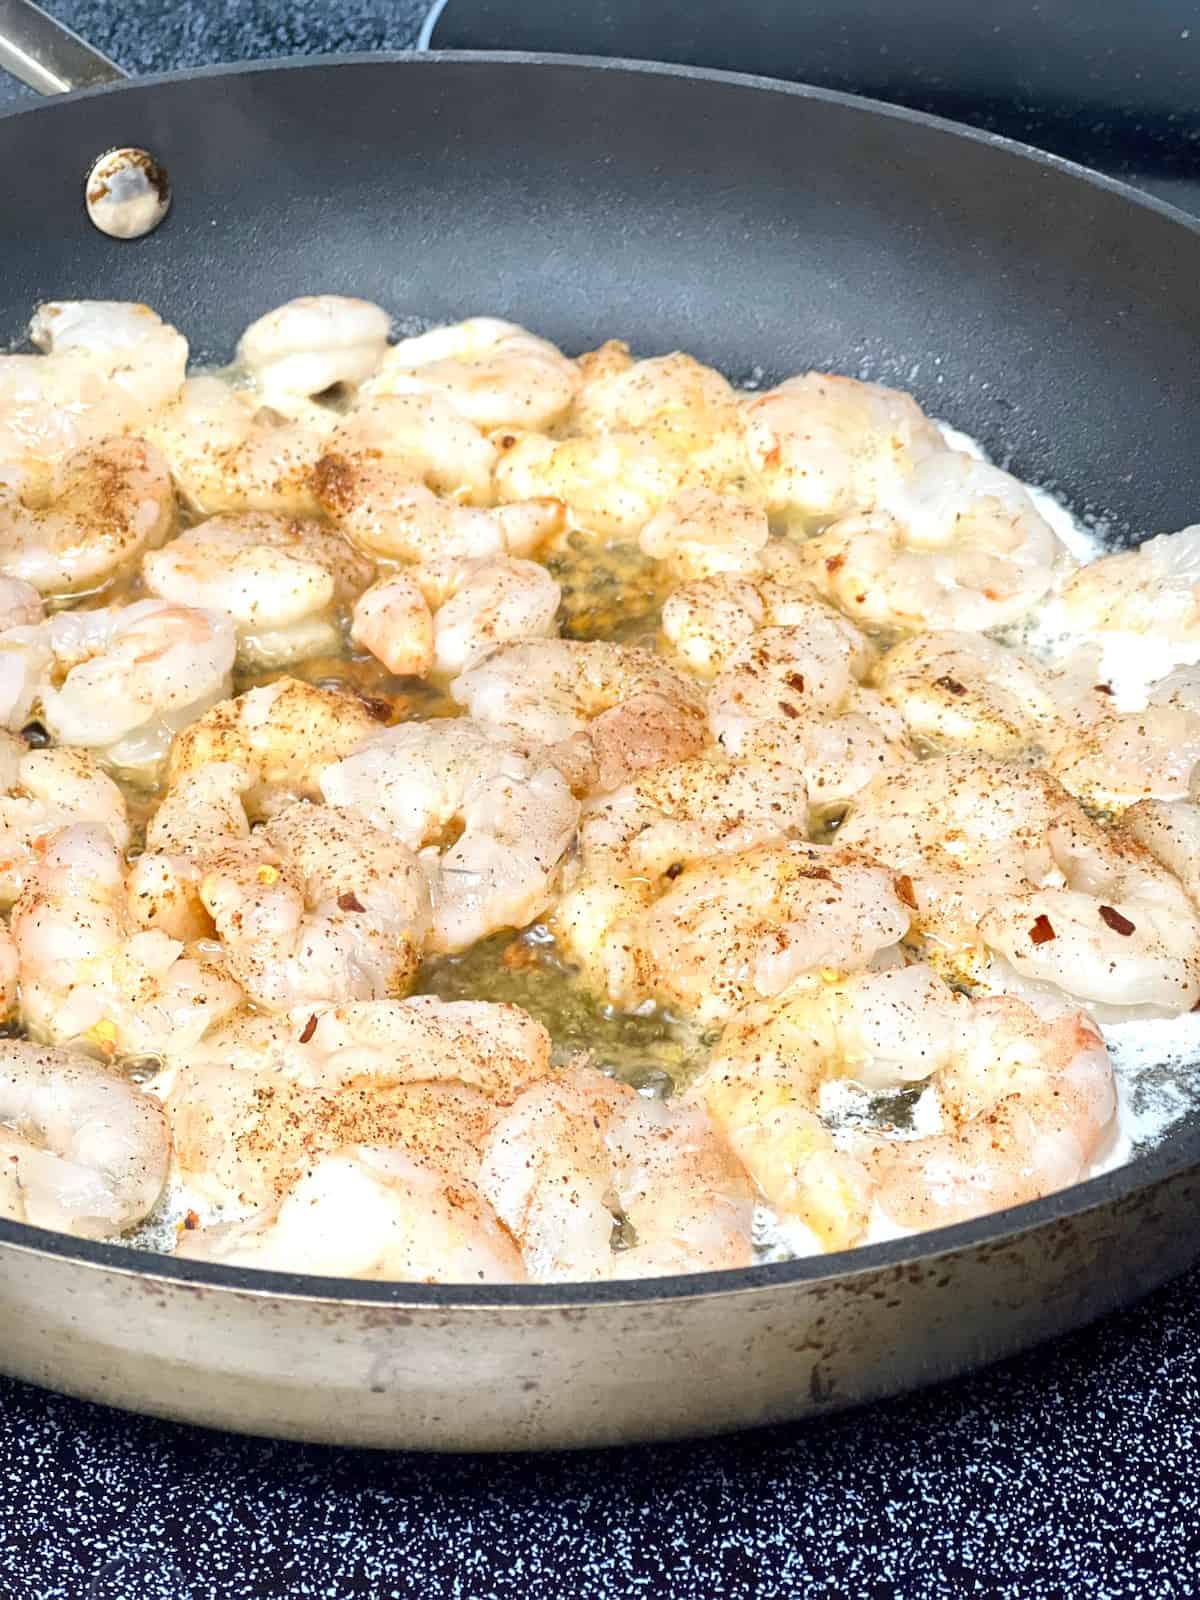 Pan filled with raw shrimp sizzling in butter.